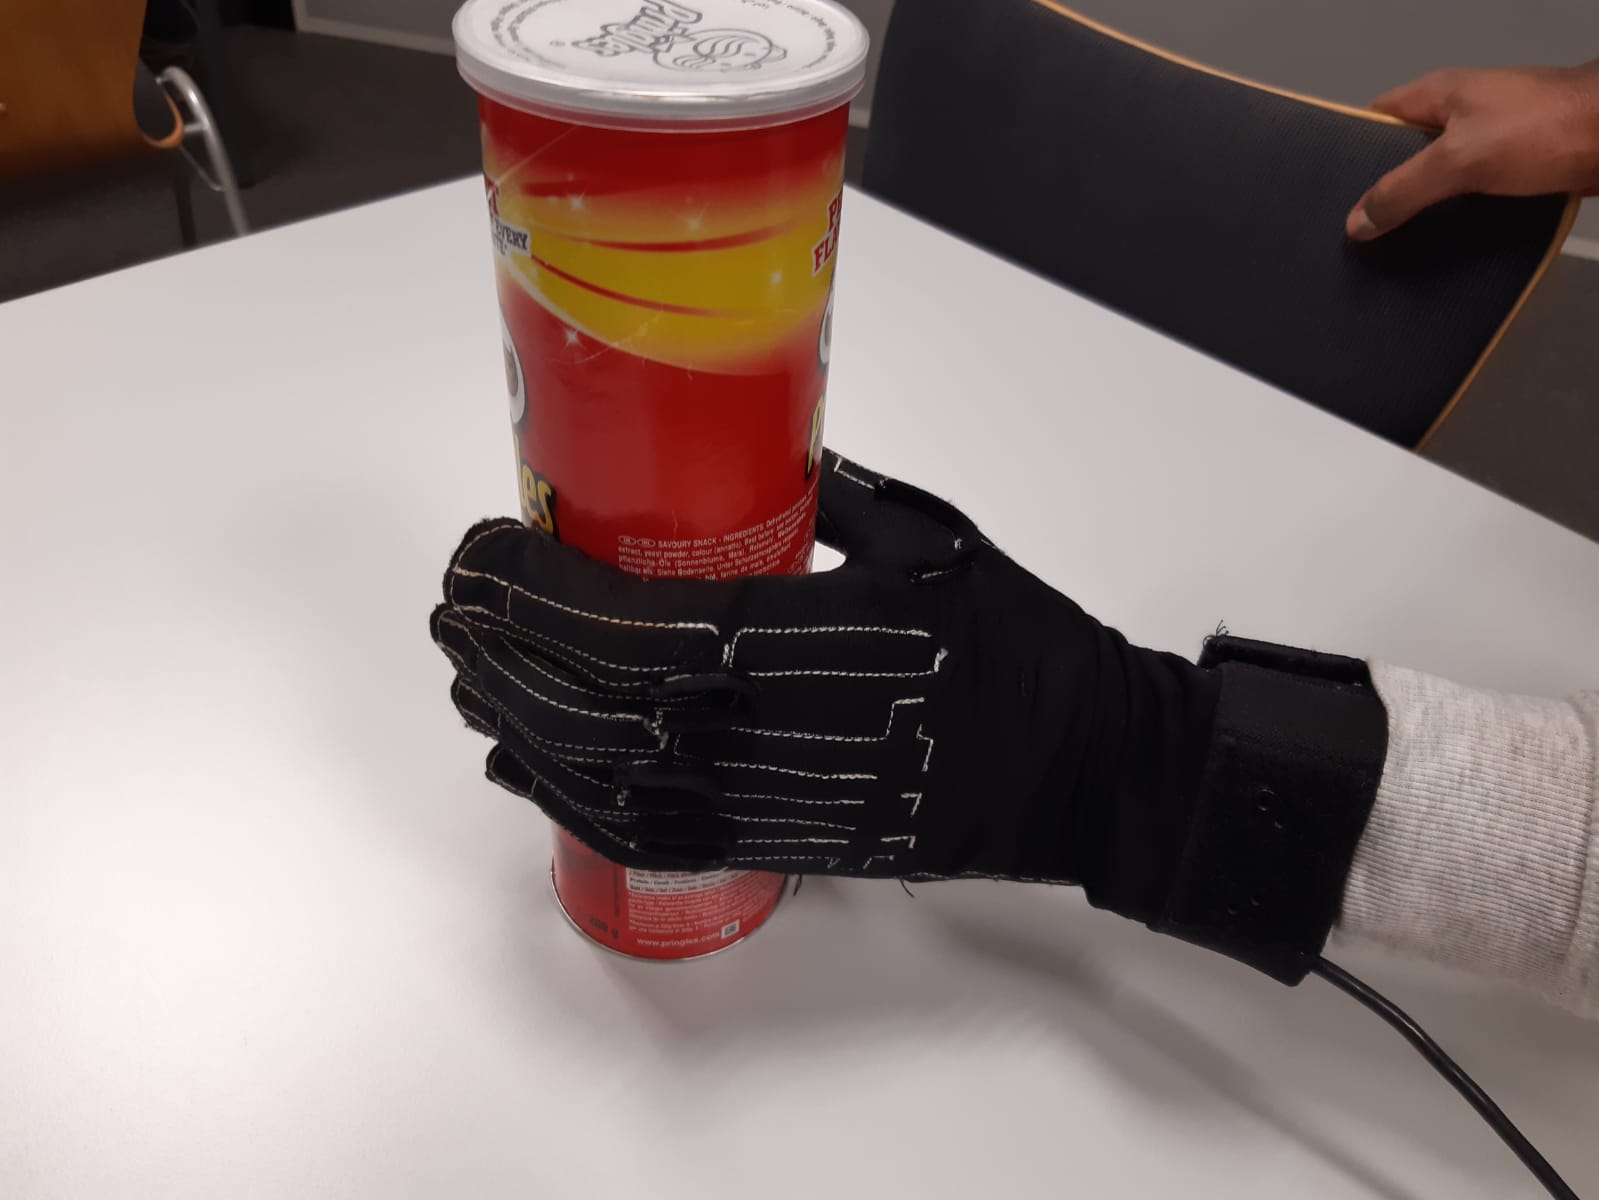 Cyberglove being used in combination with the pringles box to incorporate haptic feedback for testing purposes